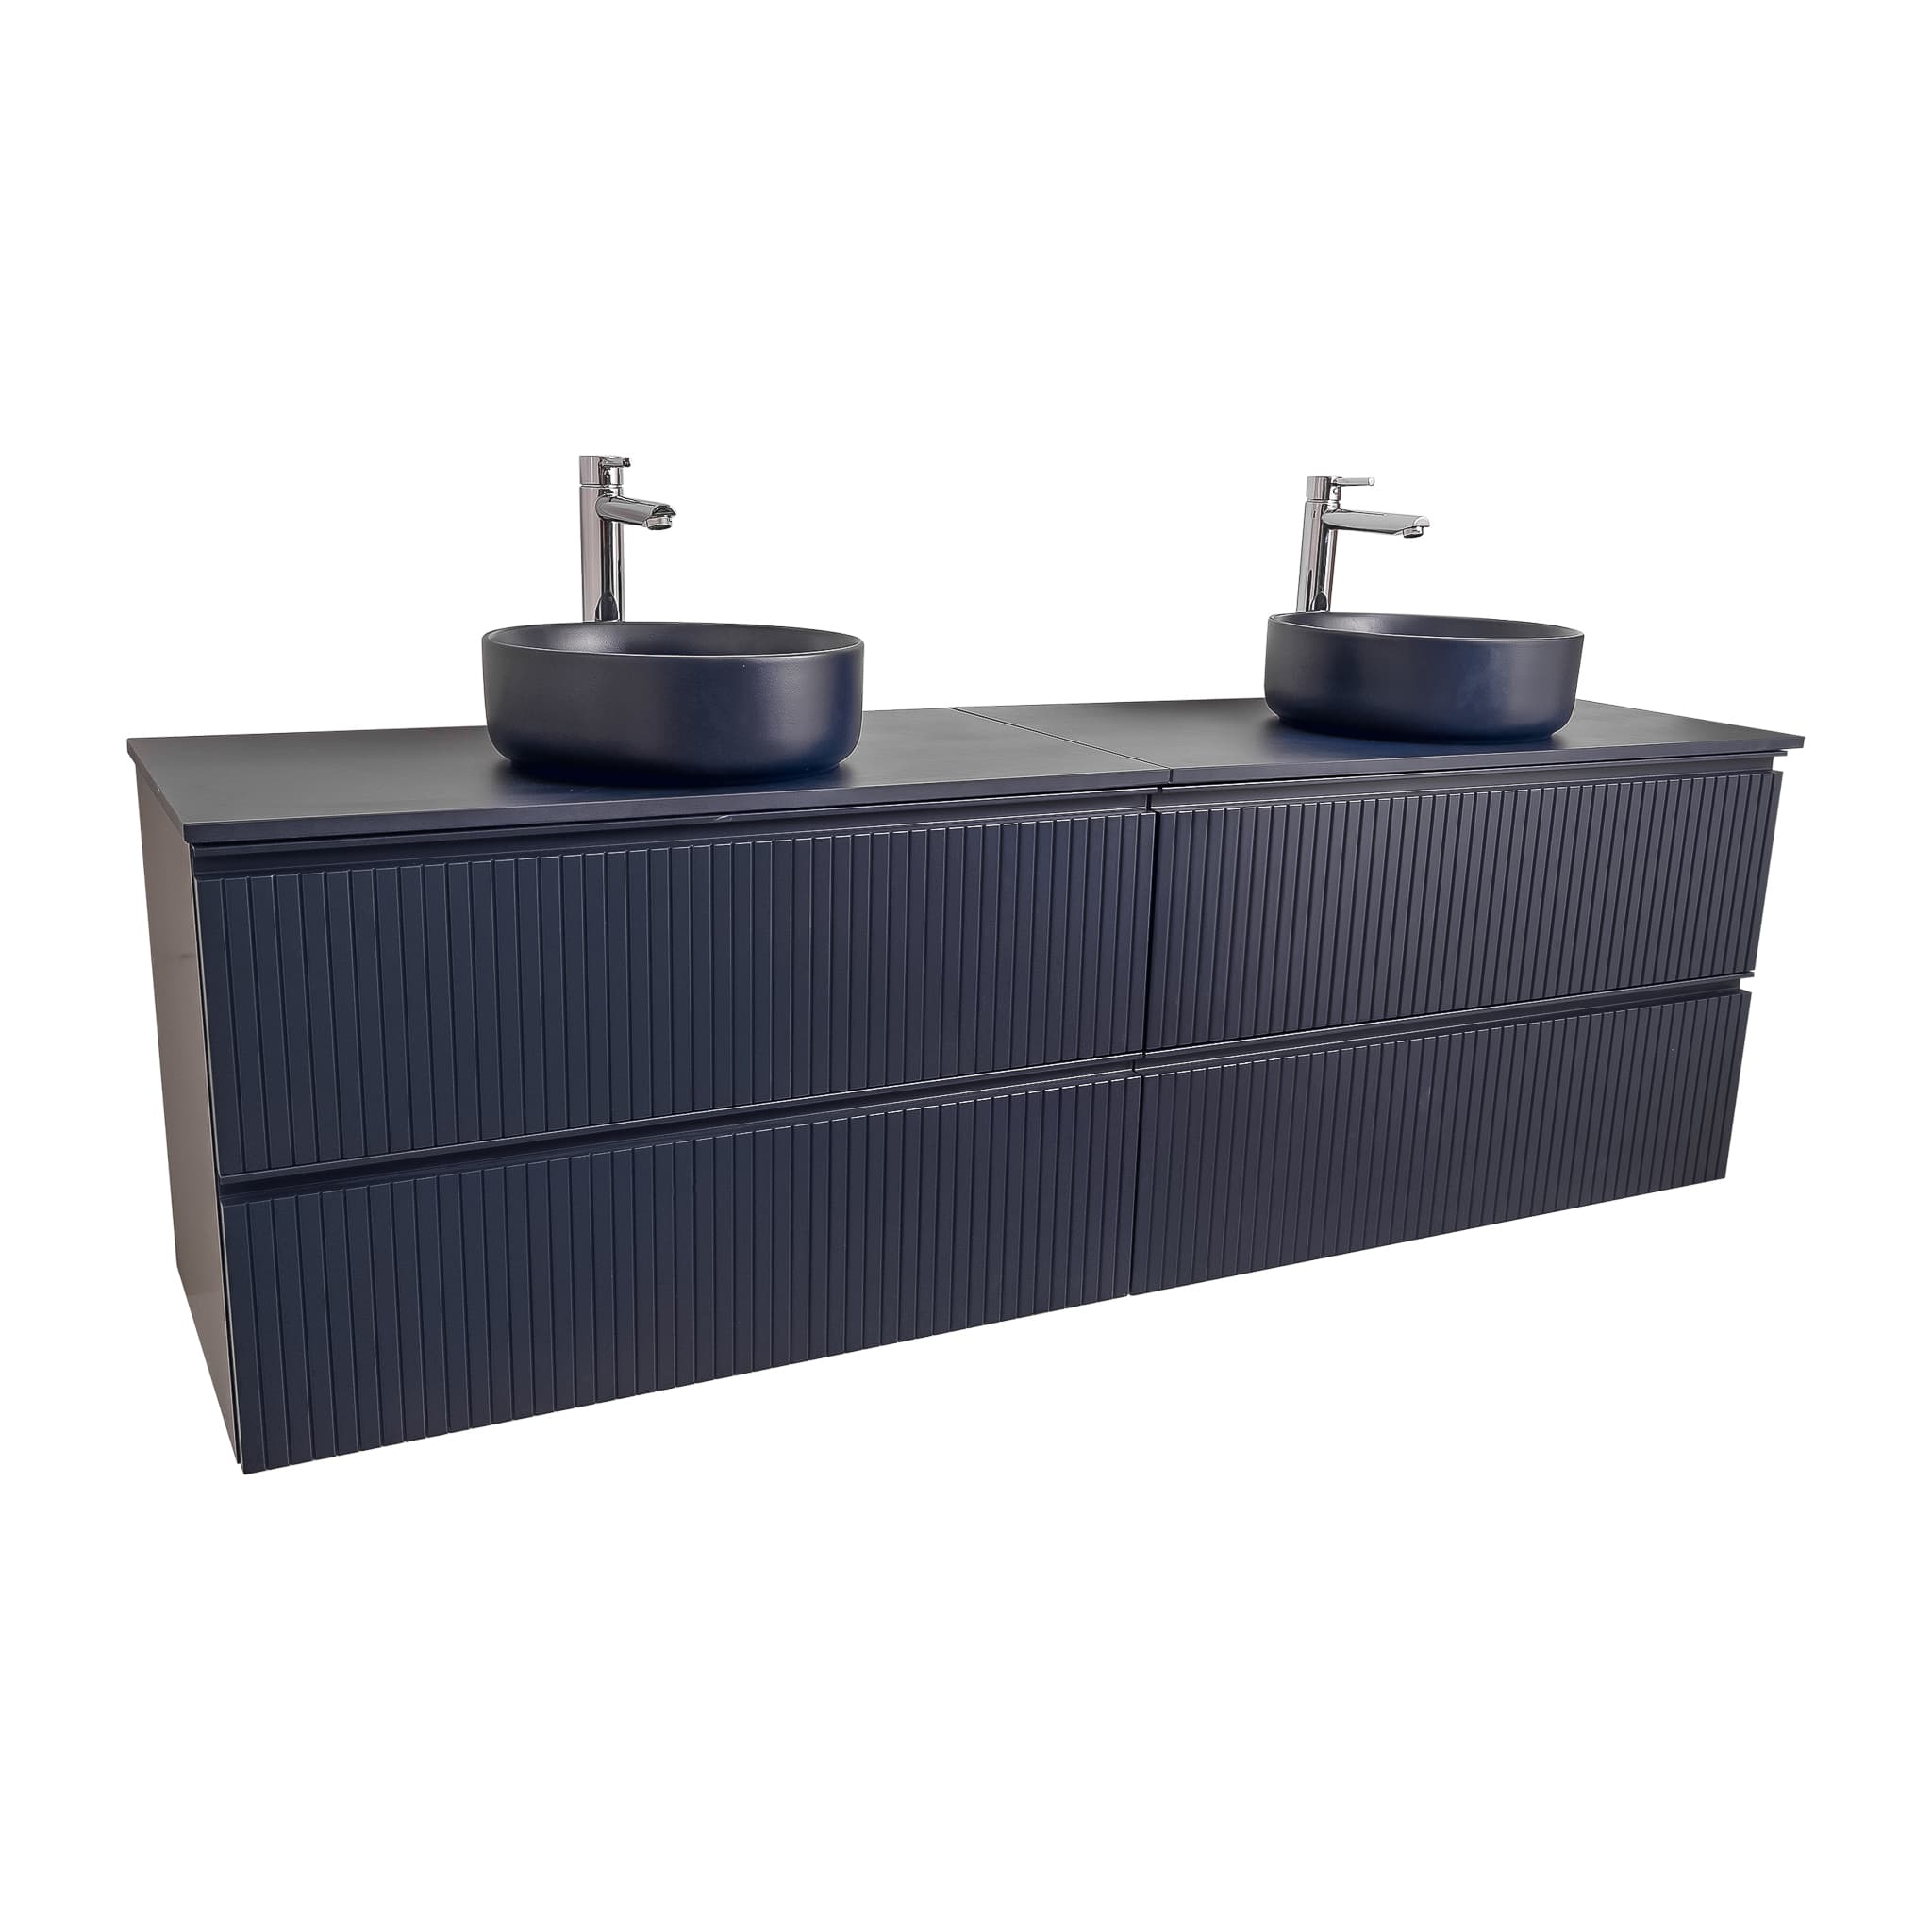 Ares 72 Matte Navy Blue Cabinet, Ares Navy Blue Top And Two Ares Navy Blue Ceramic Basin, Wall Mounted Modern Vanity Set